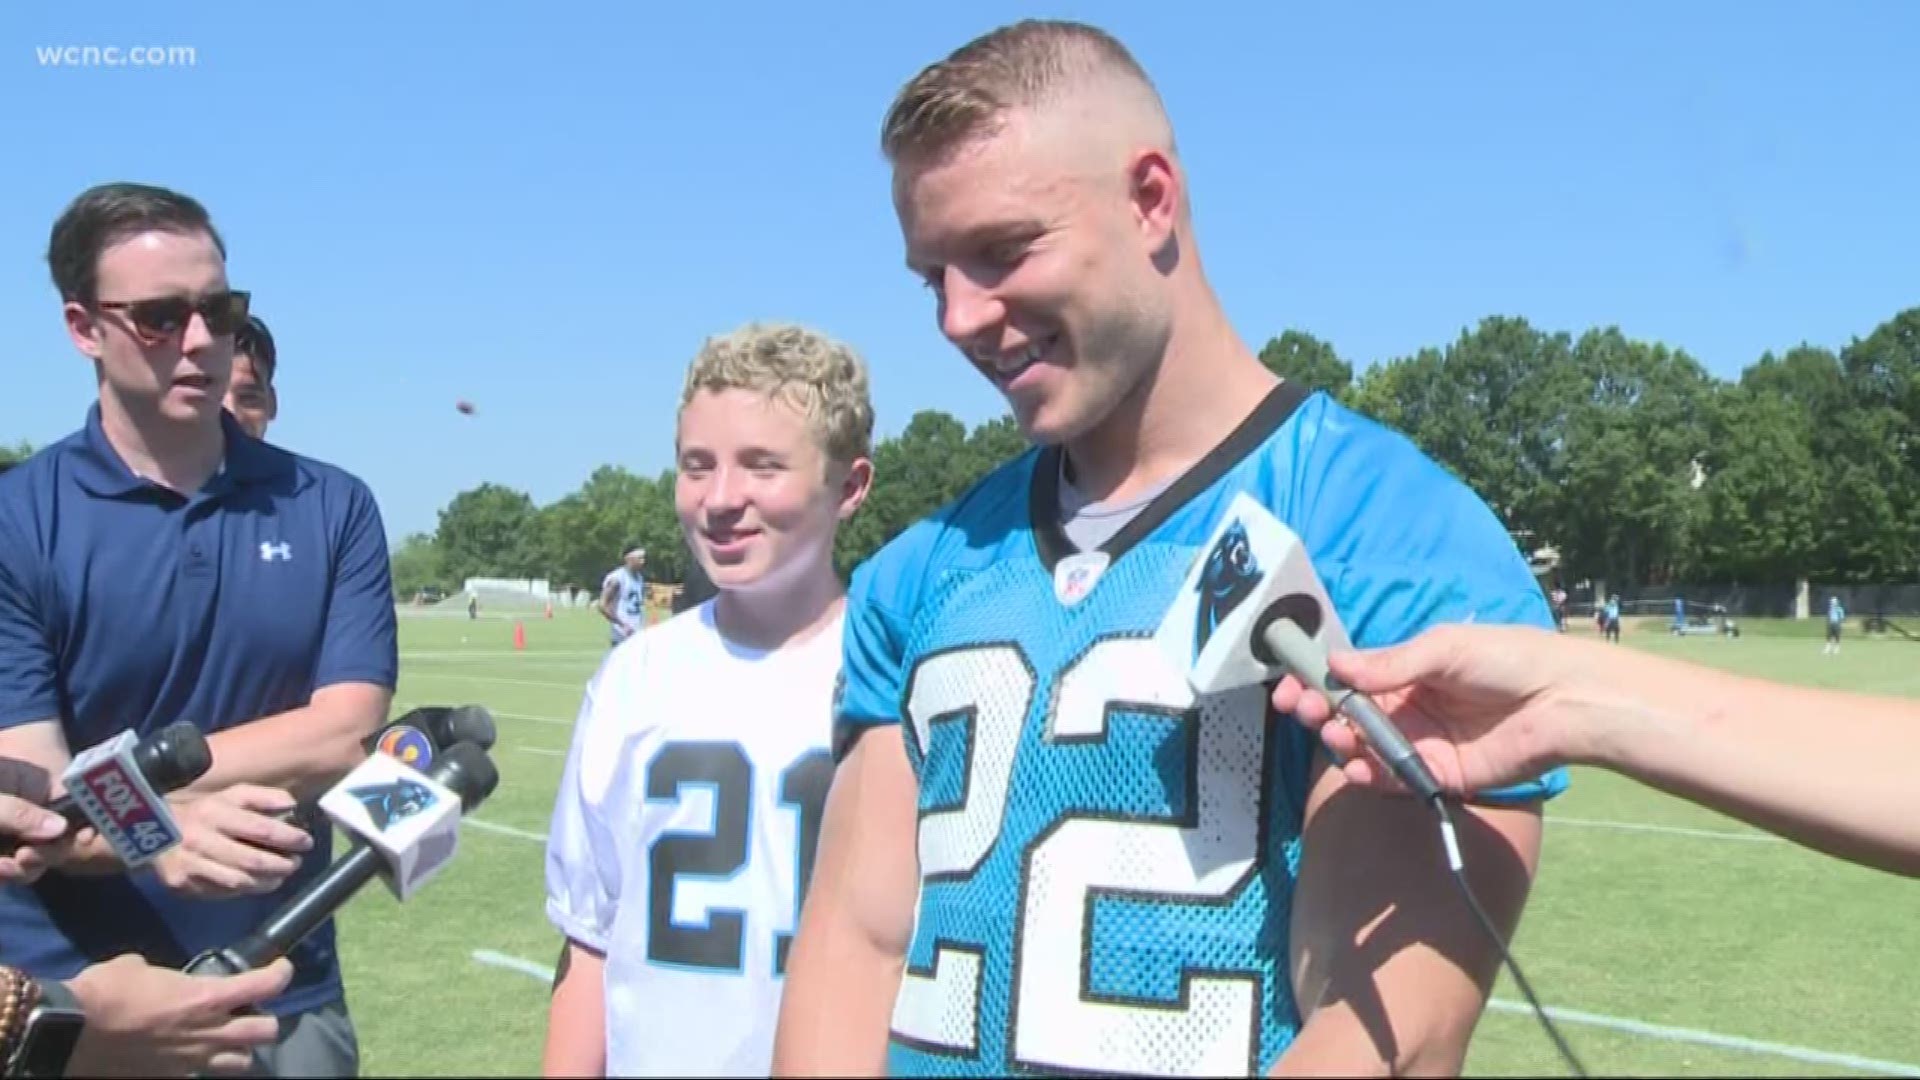 Panthers were back to practice on Tuesday for another week of offseason workouts. This time around, they had a special guest.